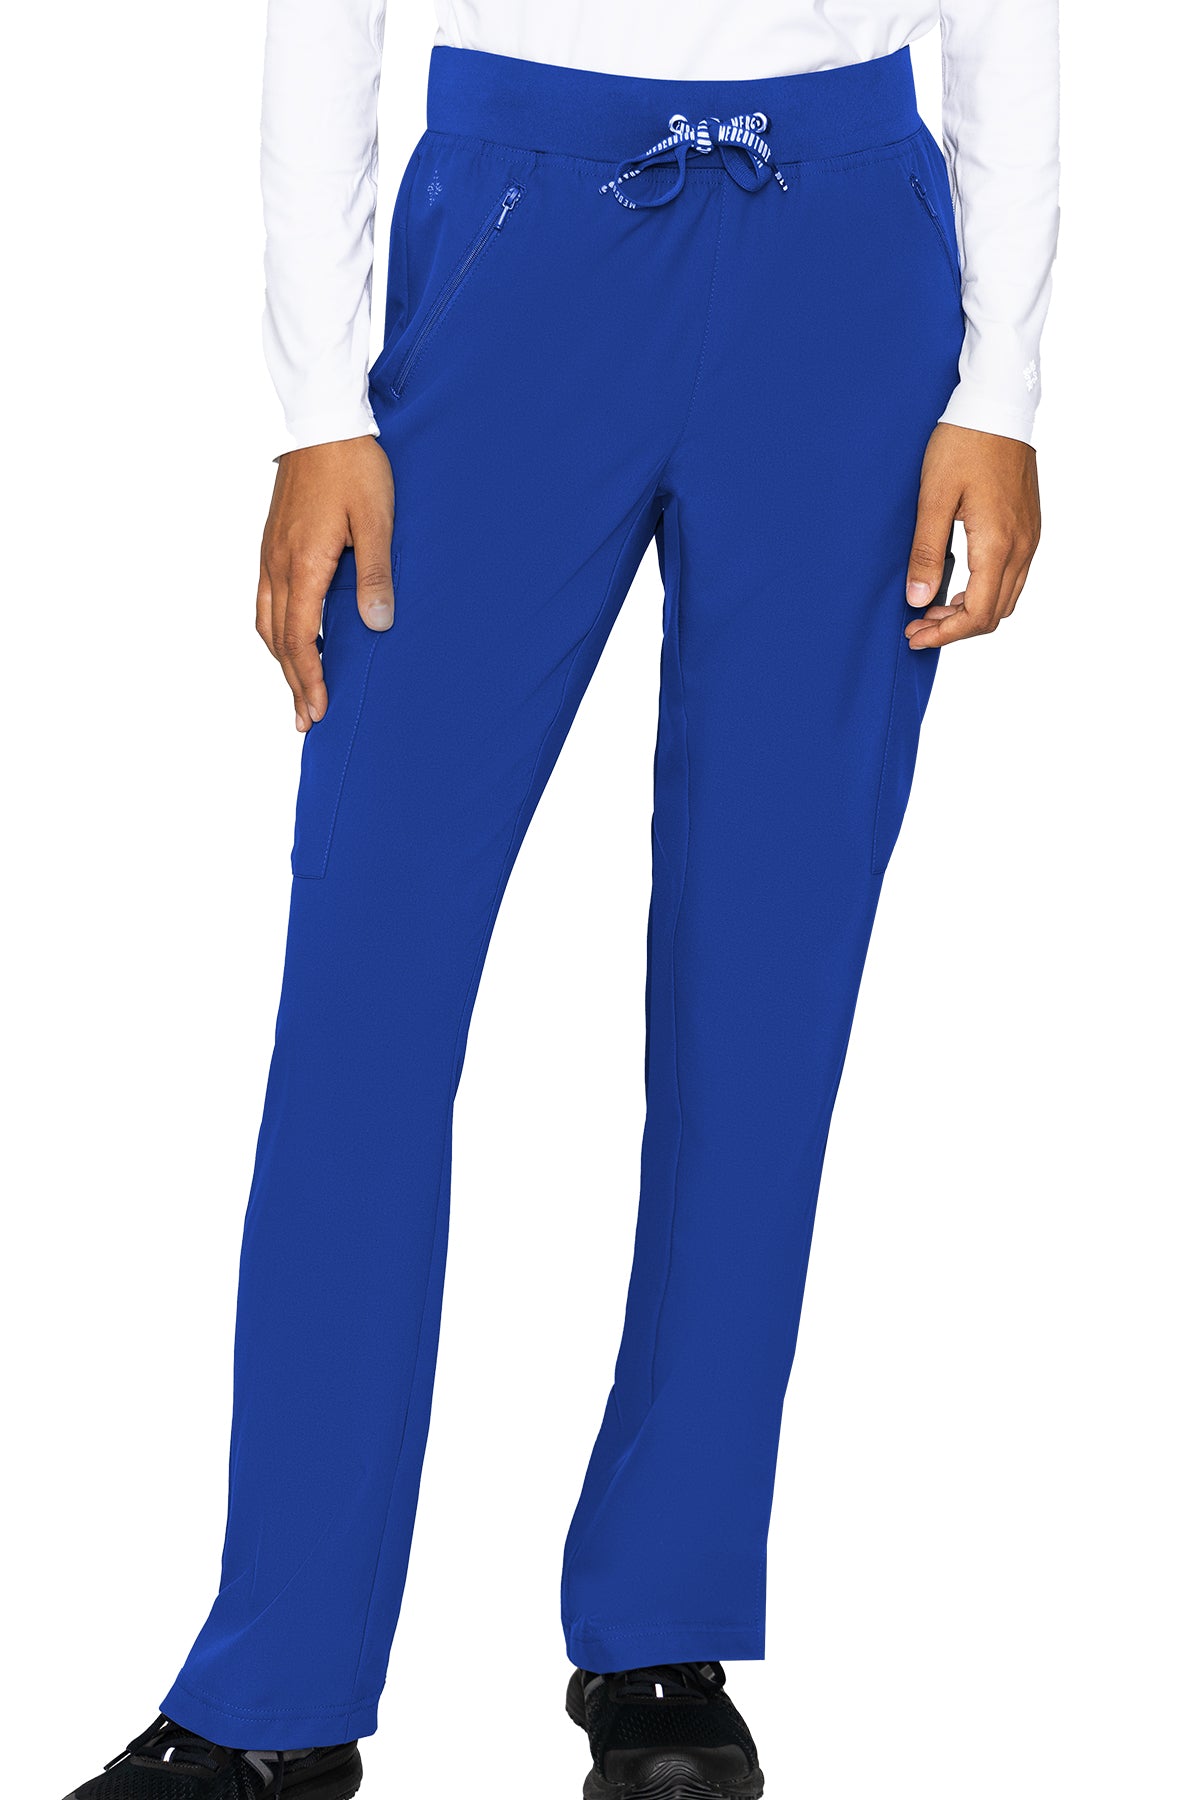 Med Couture Tall Scrub Pants Insight Zipper Pant in Royal at Parker's Clothing and Shoes.